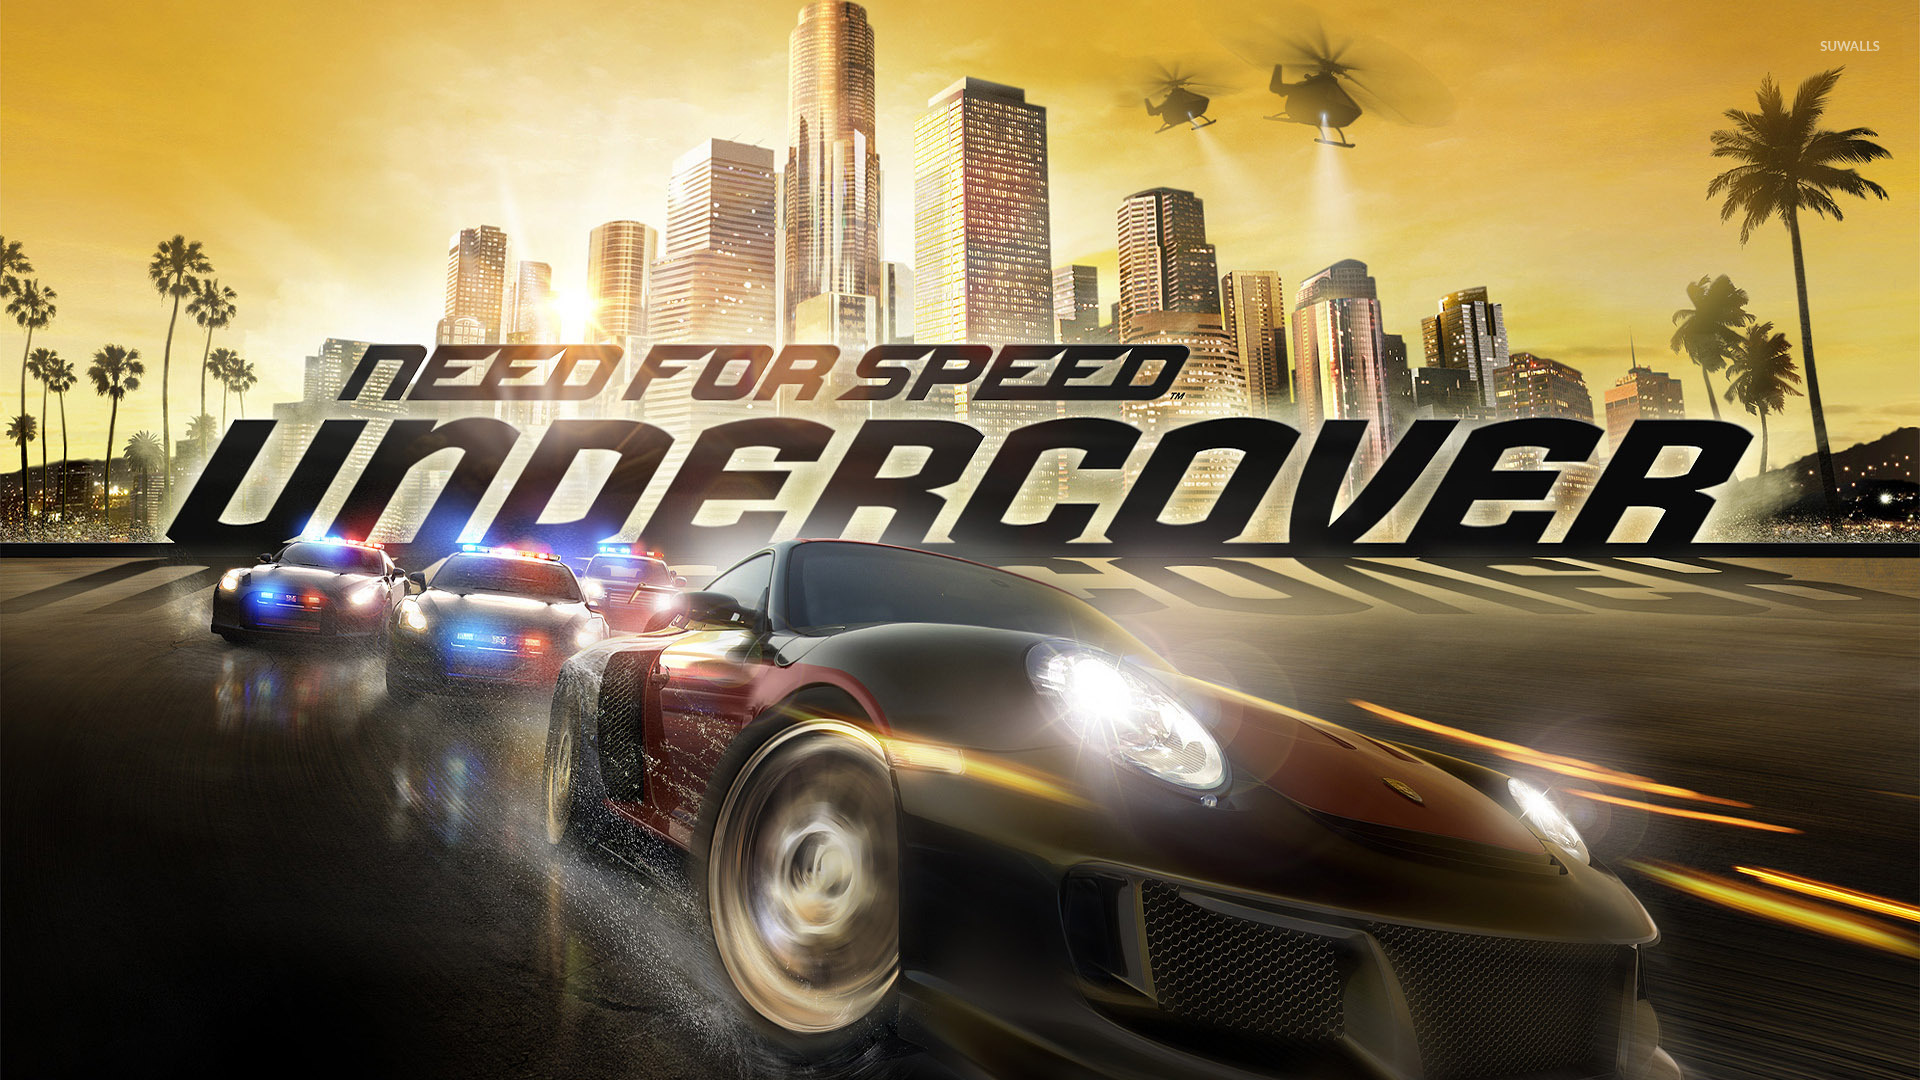 Need For Speed Prostreet 3 Wallpaper Game Wallpapers 1023 Images, Photos, Reviews